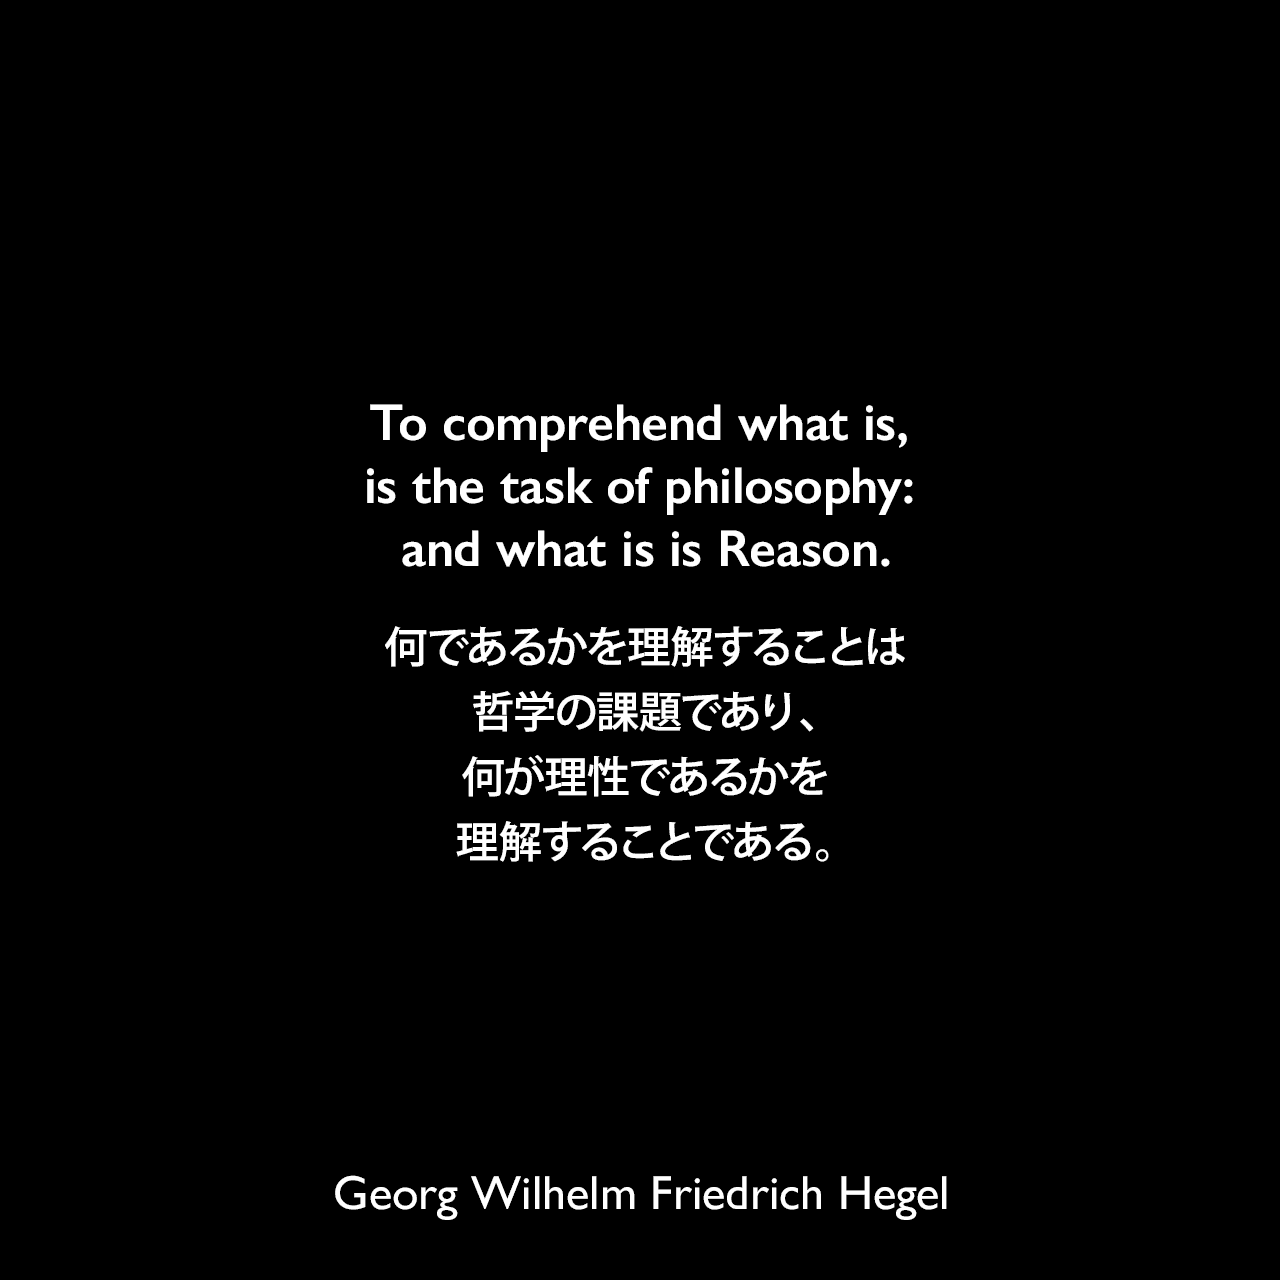 To comprehend what is, is the task of philosophy: and what is is Reason.何であるかを理解することは哲学の課題であり、何が理性であるかを理解することである。Georg Wilhelm Friedrich Hegel